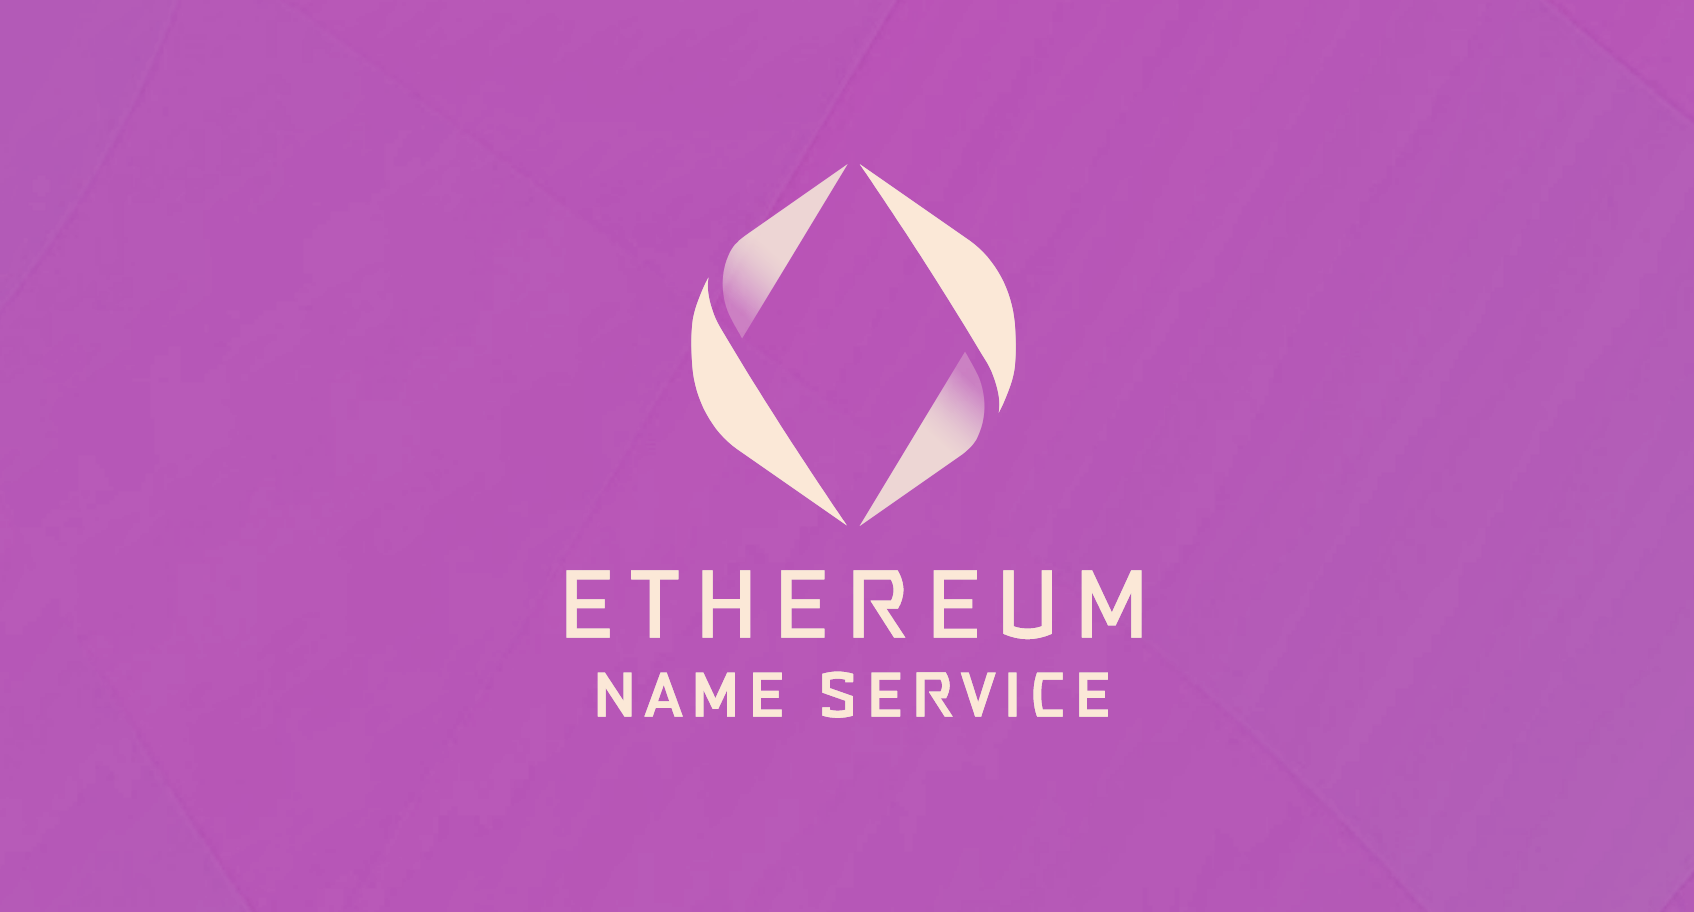 The Ethereum Name Service wants to make Ethereum easier to use. But there's a catch. Image: Ethereum Name Service.